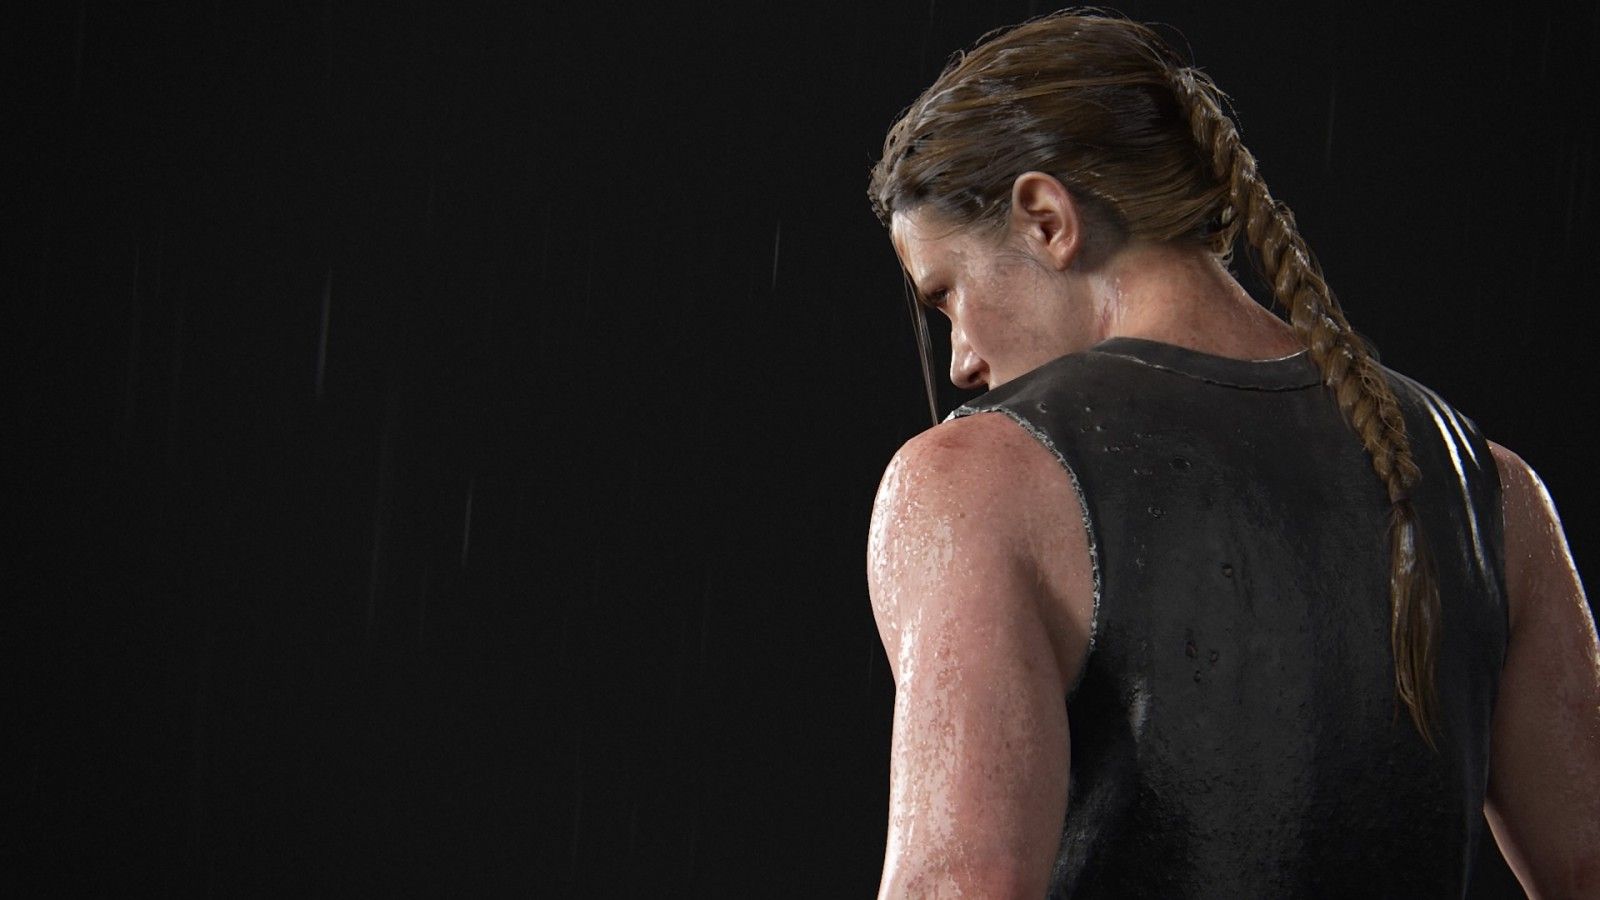 Wallpaper, The Last of Us abby 1920x1080